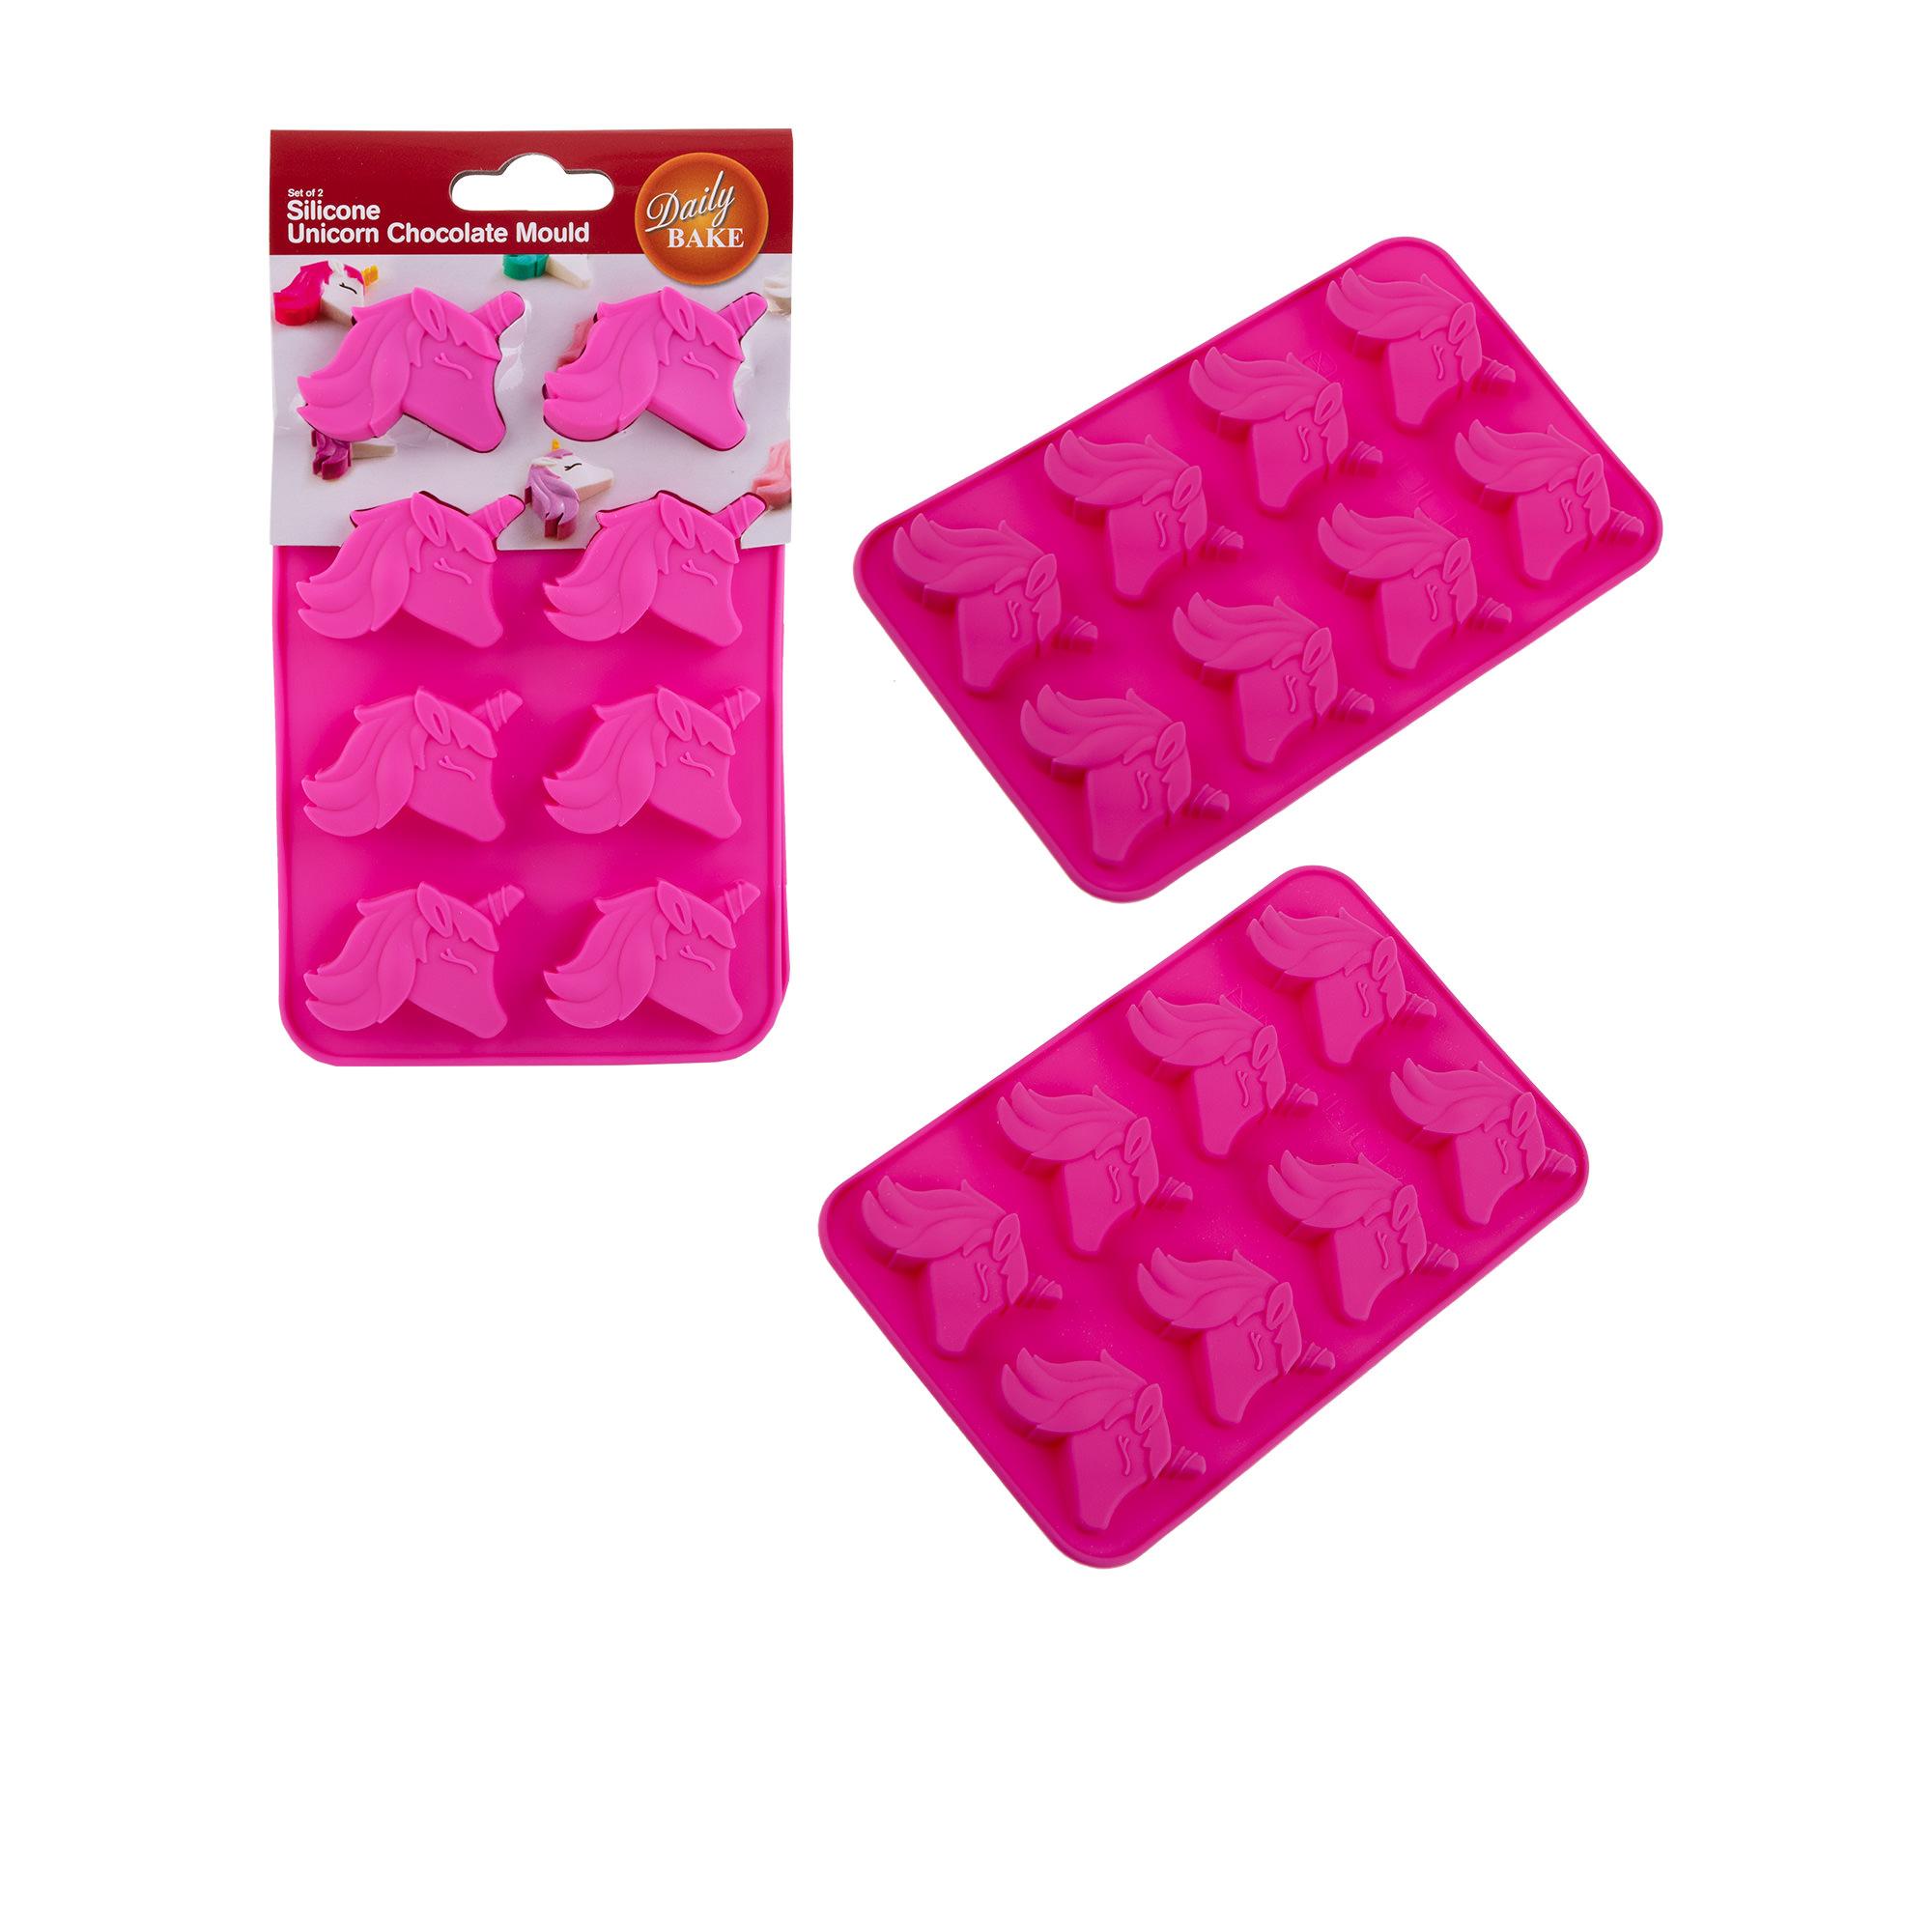 Daily Bake Unicorn Chocolate Mould 8 Cup Set of 2 Pink Image 3